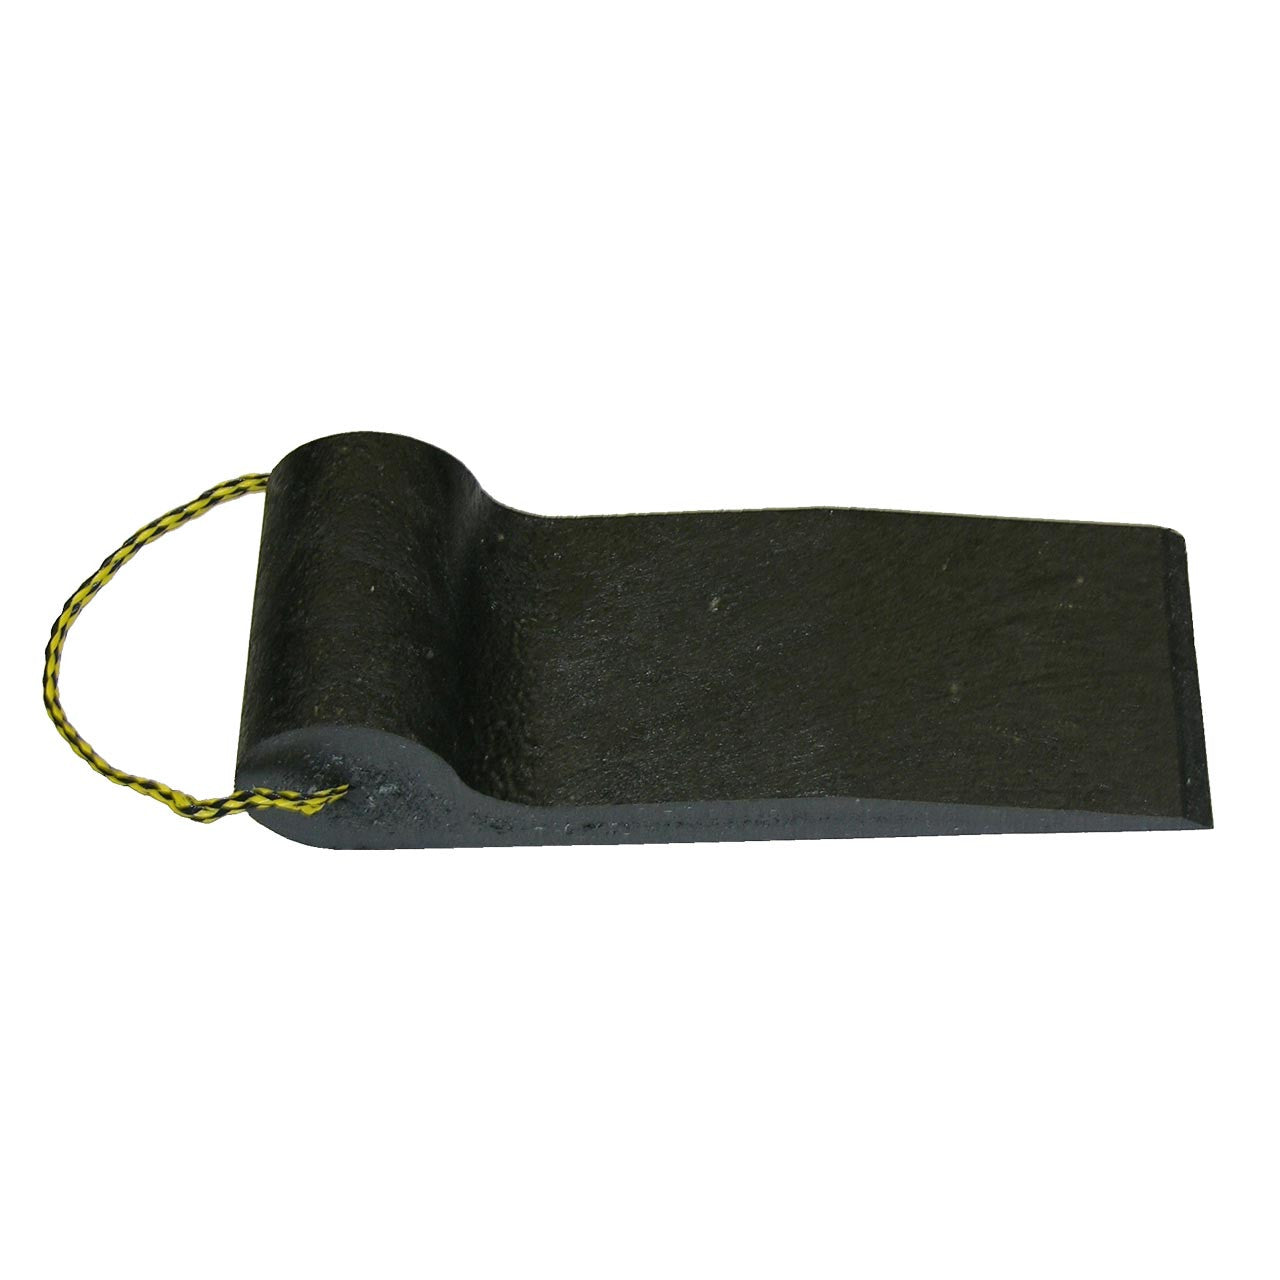 6.5" Turtle Double Tire Skate